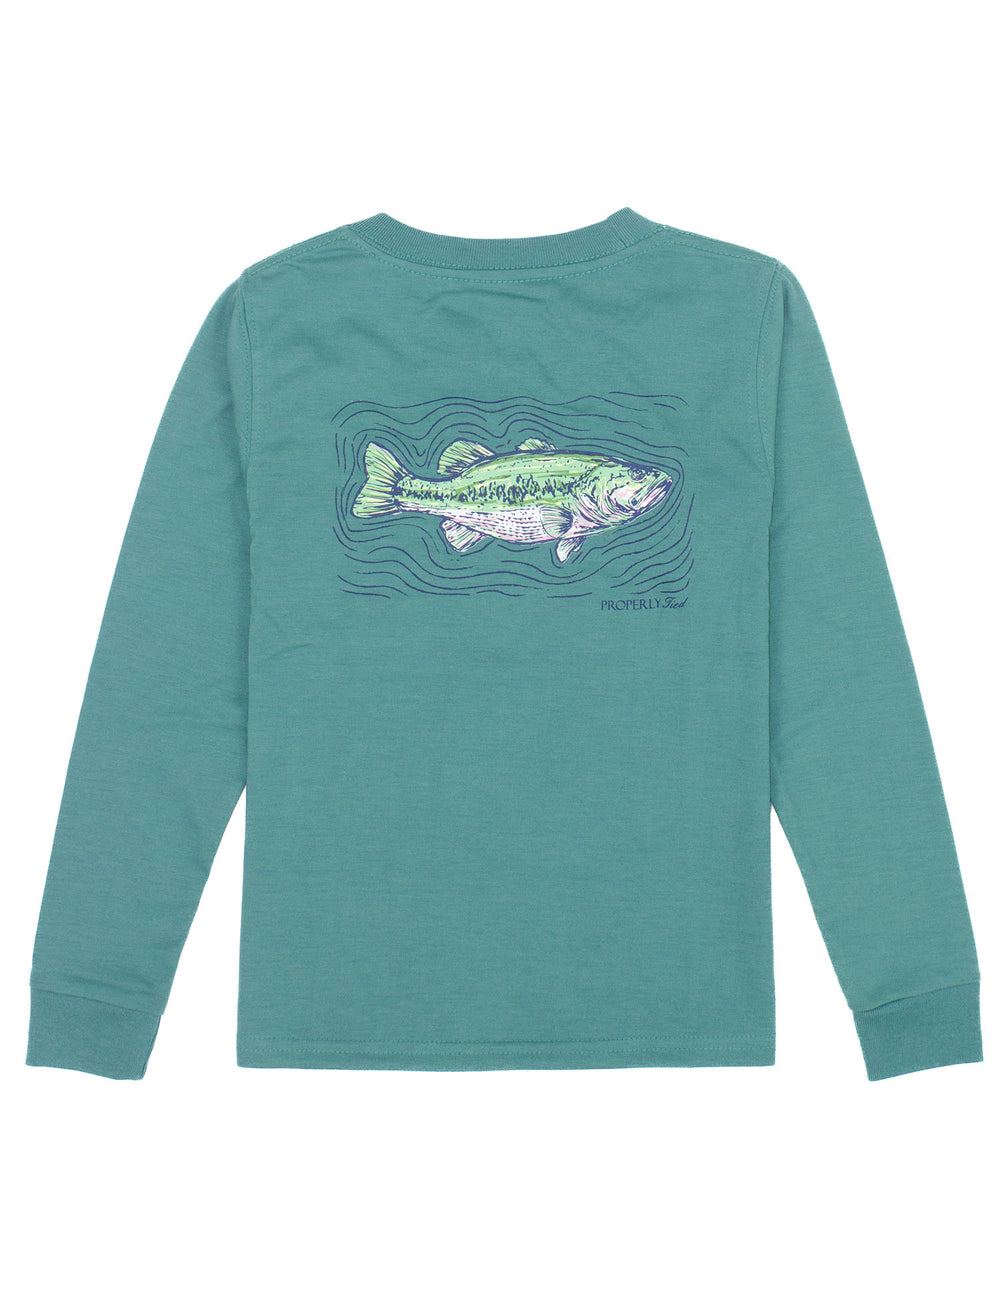 Properly Tied-Long Sleeve Spotted Bass Teal Tee